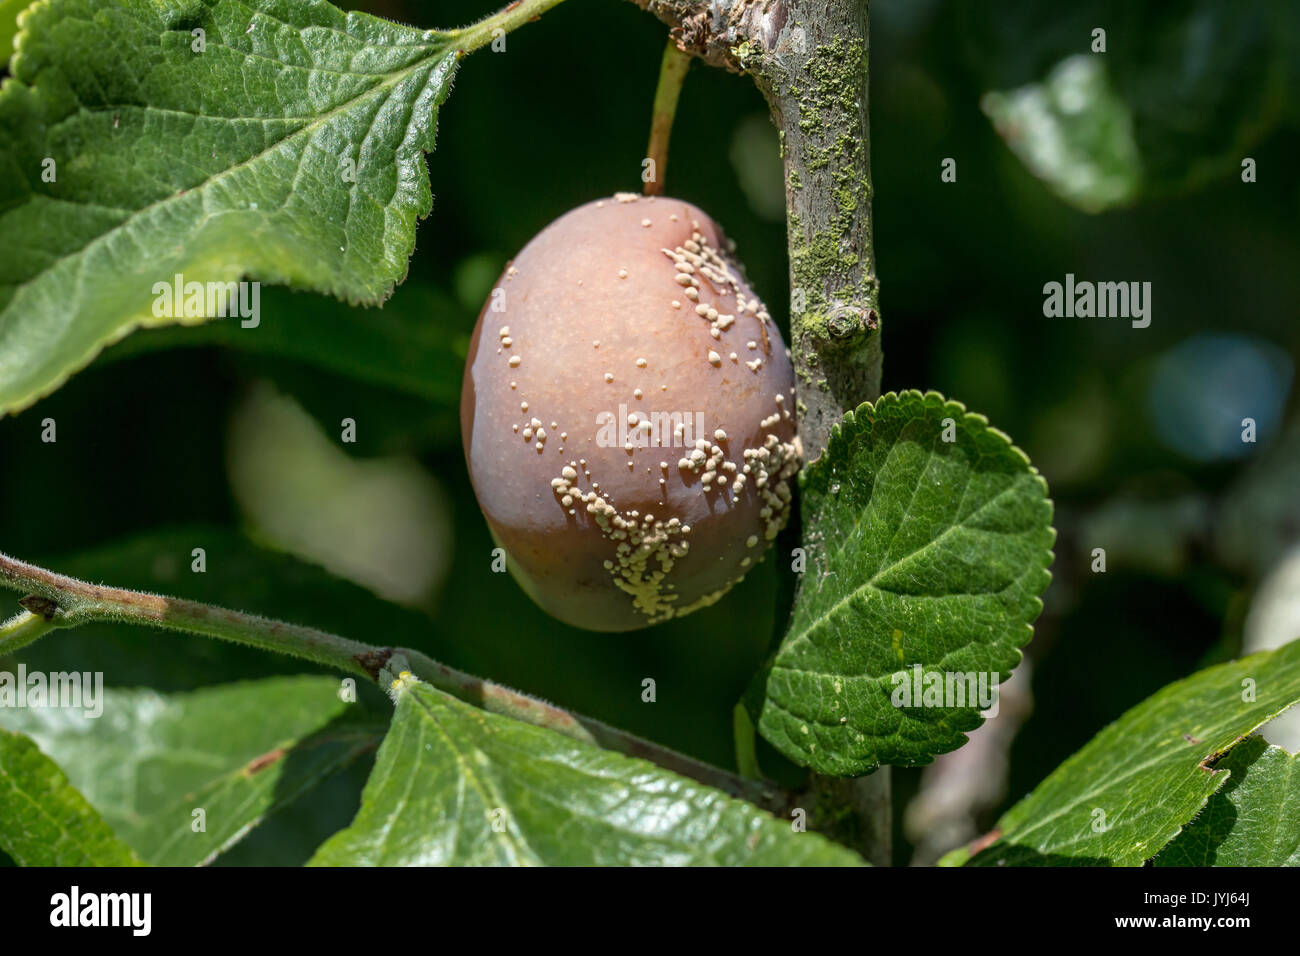 Ripe Victoria Plum on tree, infected with Brown Rot fungal disease. Stock Photo